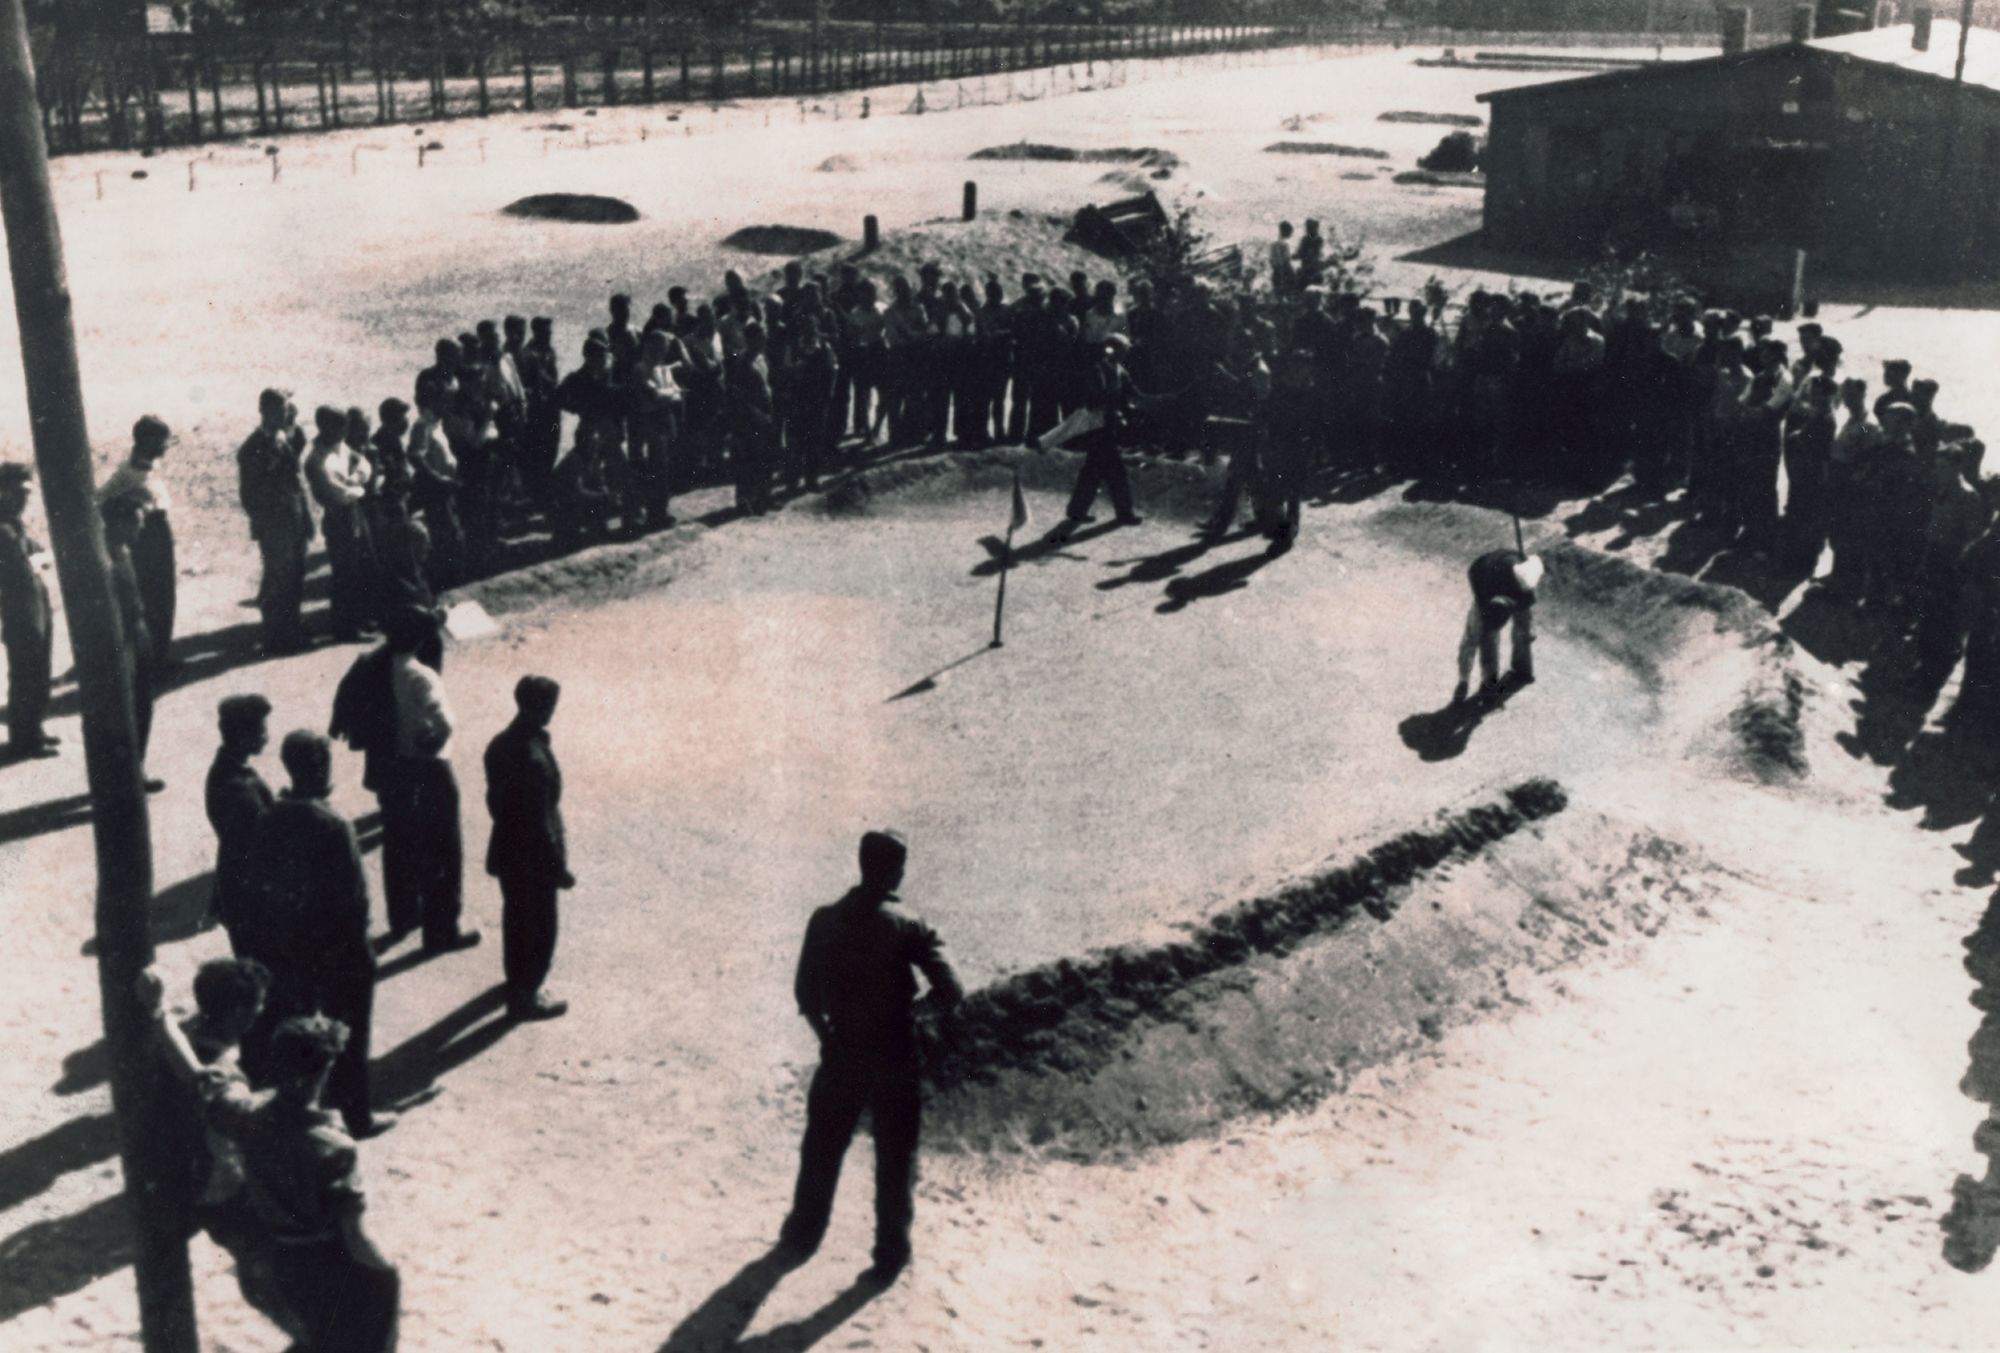 Prisoners of War play golf at Stalag Luft III, a camp run by the German Luftwaffe for captured airmen during the Second World War until its liberation in April 1945.